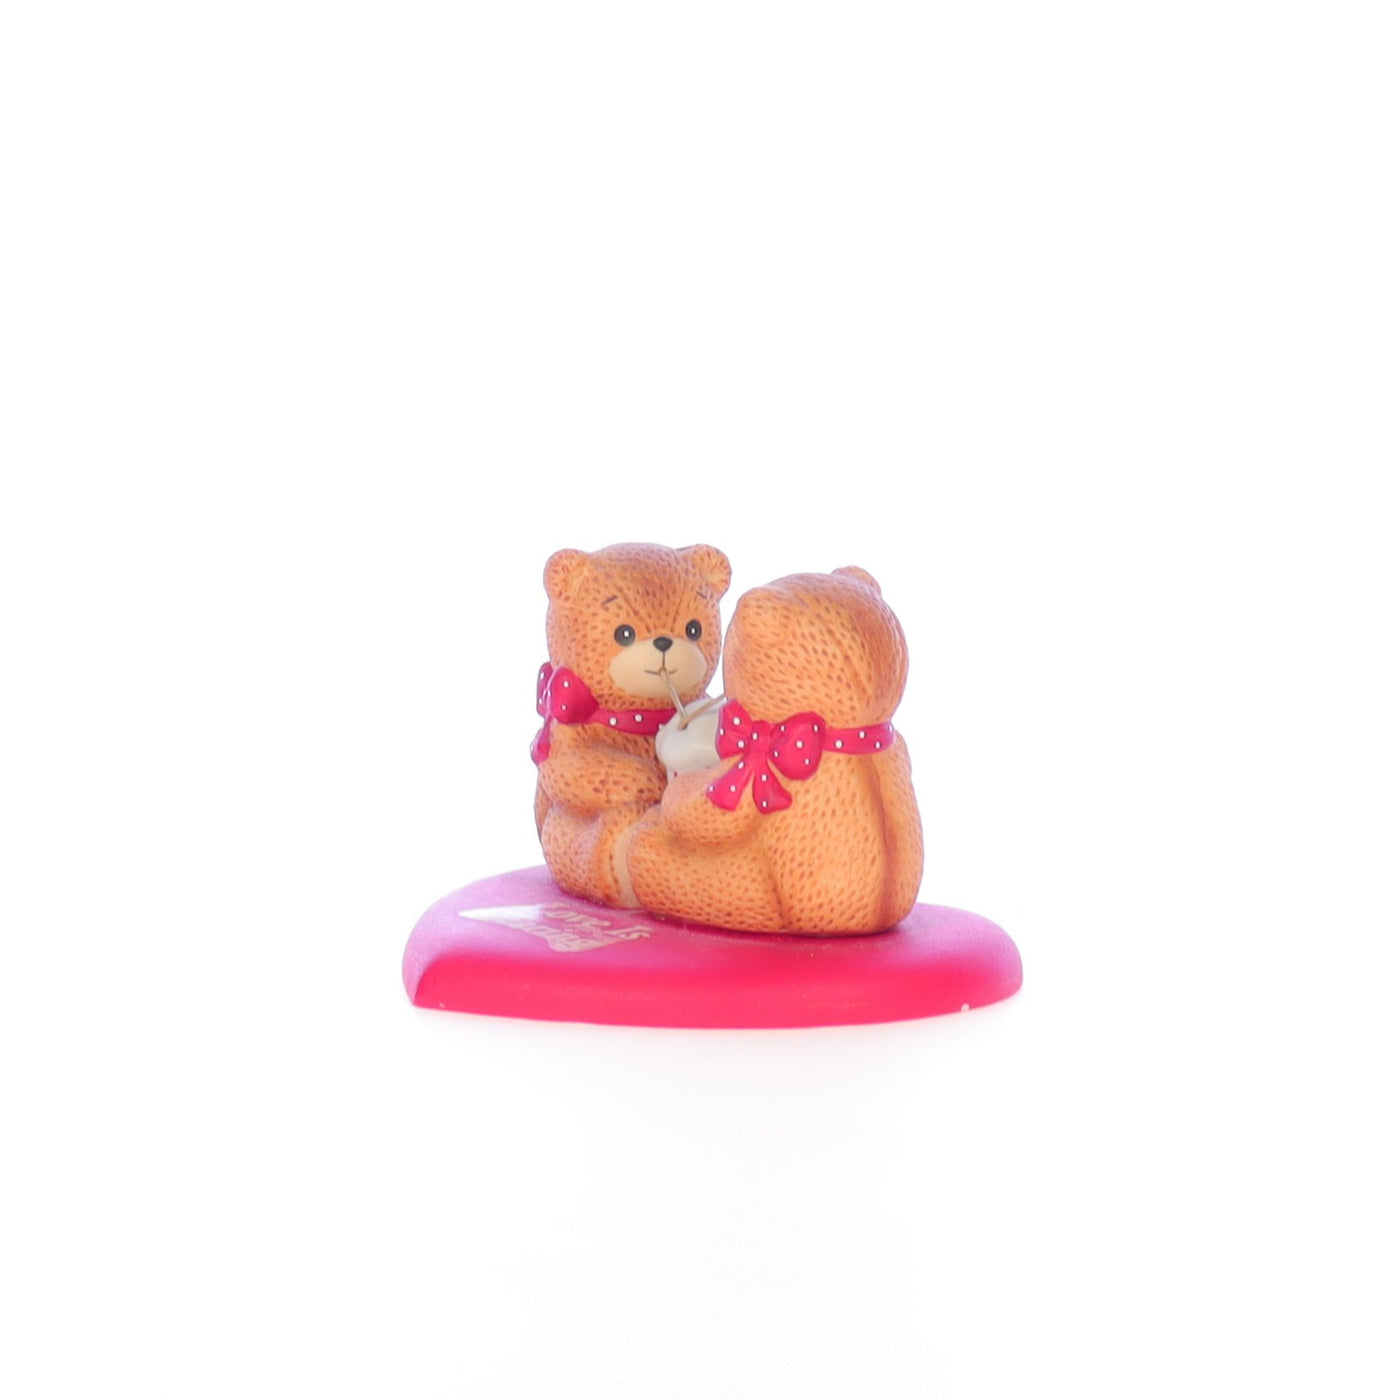 Lucy_And_Me_by_Lucy_Atwell_Porcelain_Figurine_Love_is_Sharing_Lucy_Unknown_026_02